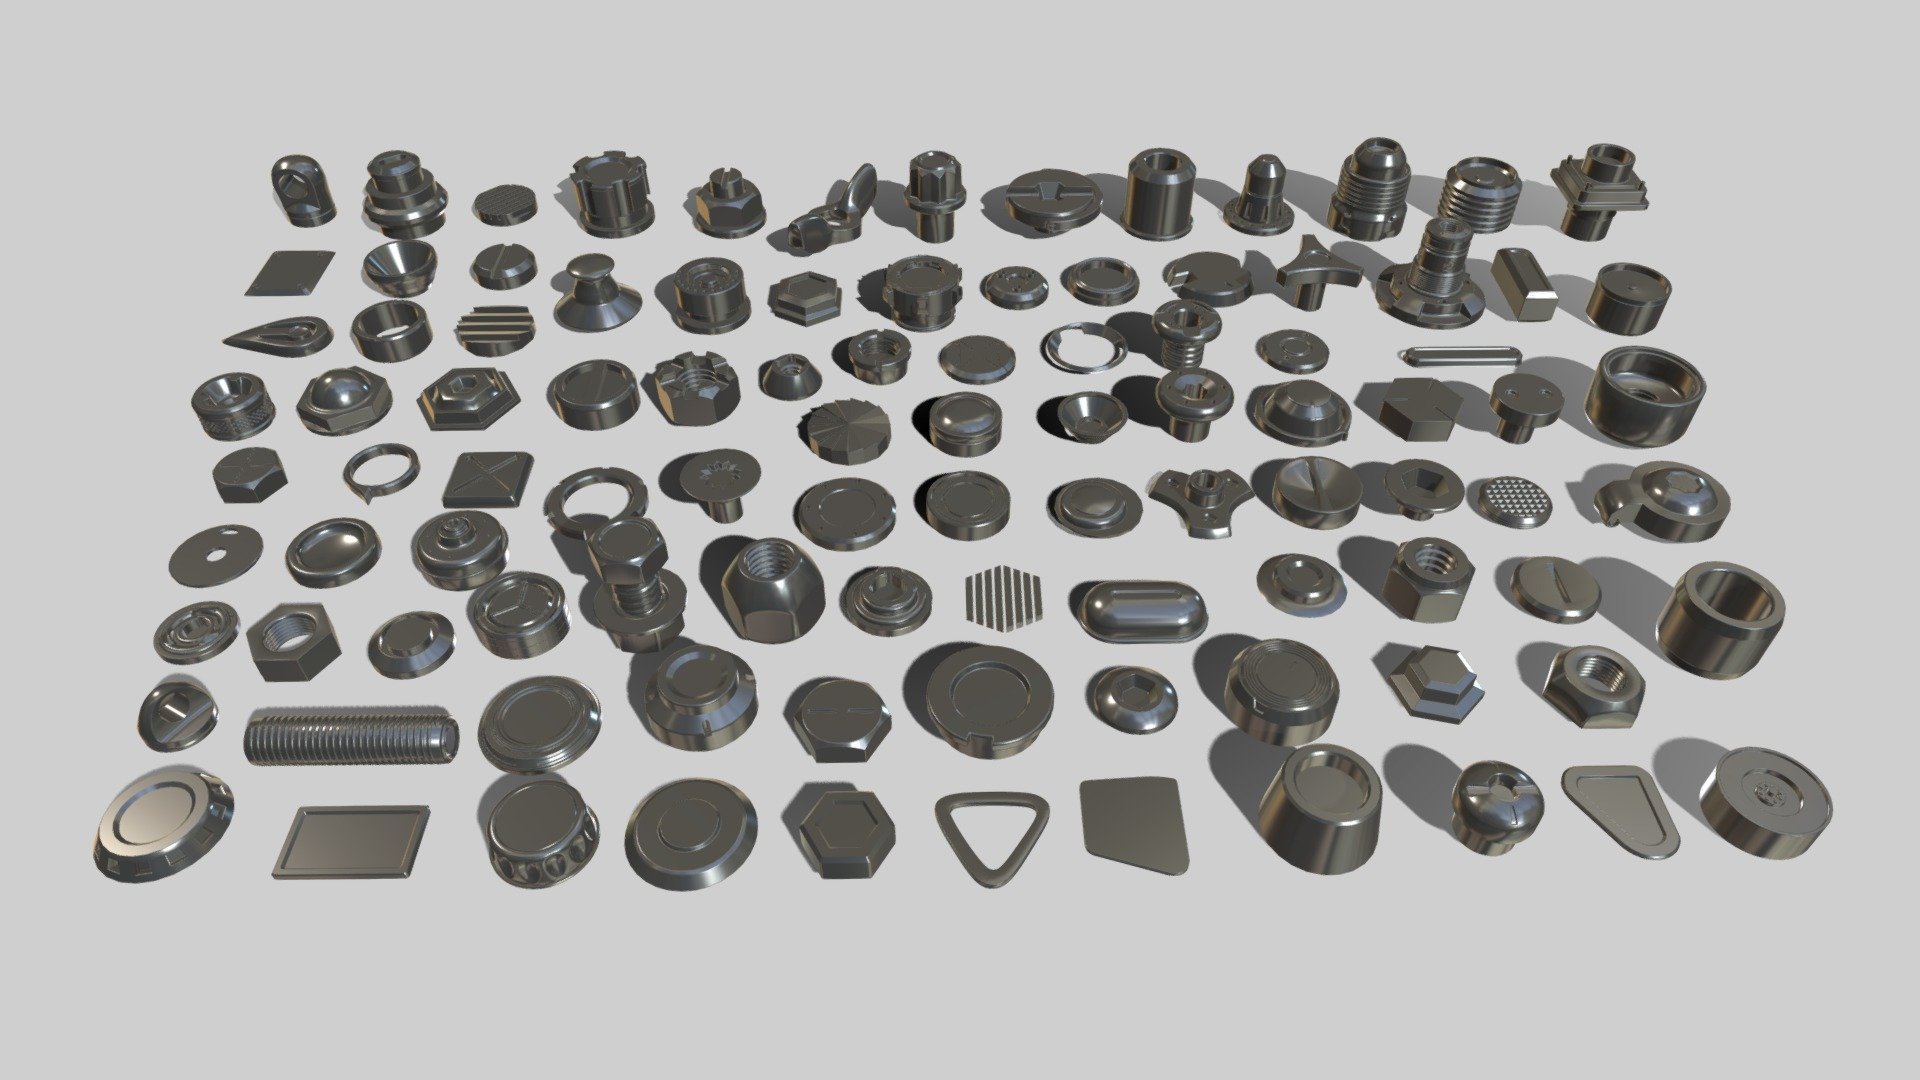 Get pack - https://www.artstation.com/a/15288

include max(2018), blend(2.8),fbx, stl and obj files

poly - 191882

vert - 187911 - Bolts and Knobs-part-1-100 pieces - 3D model by 3d.armzep 3d model